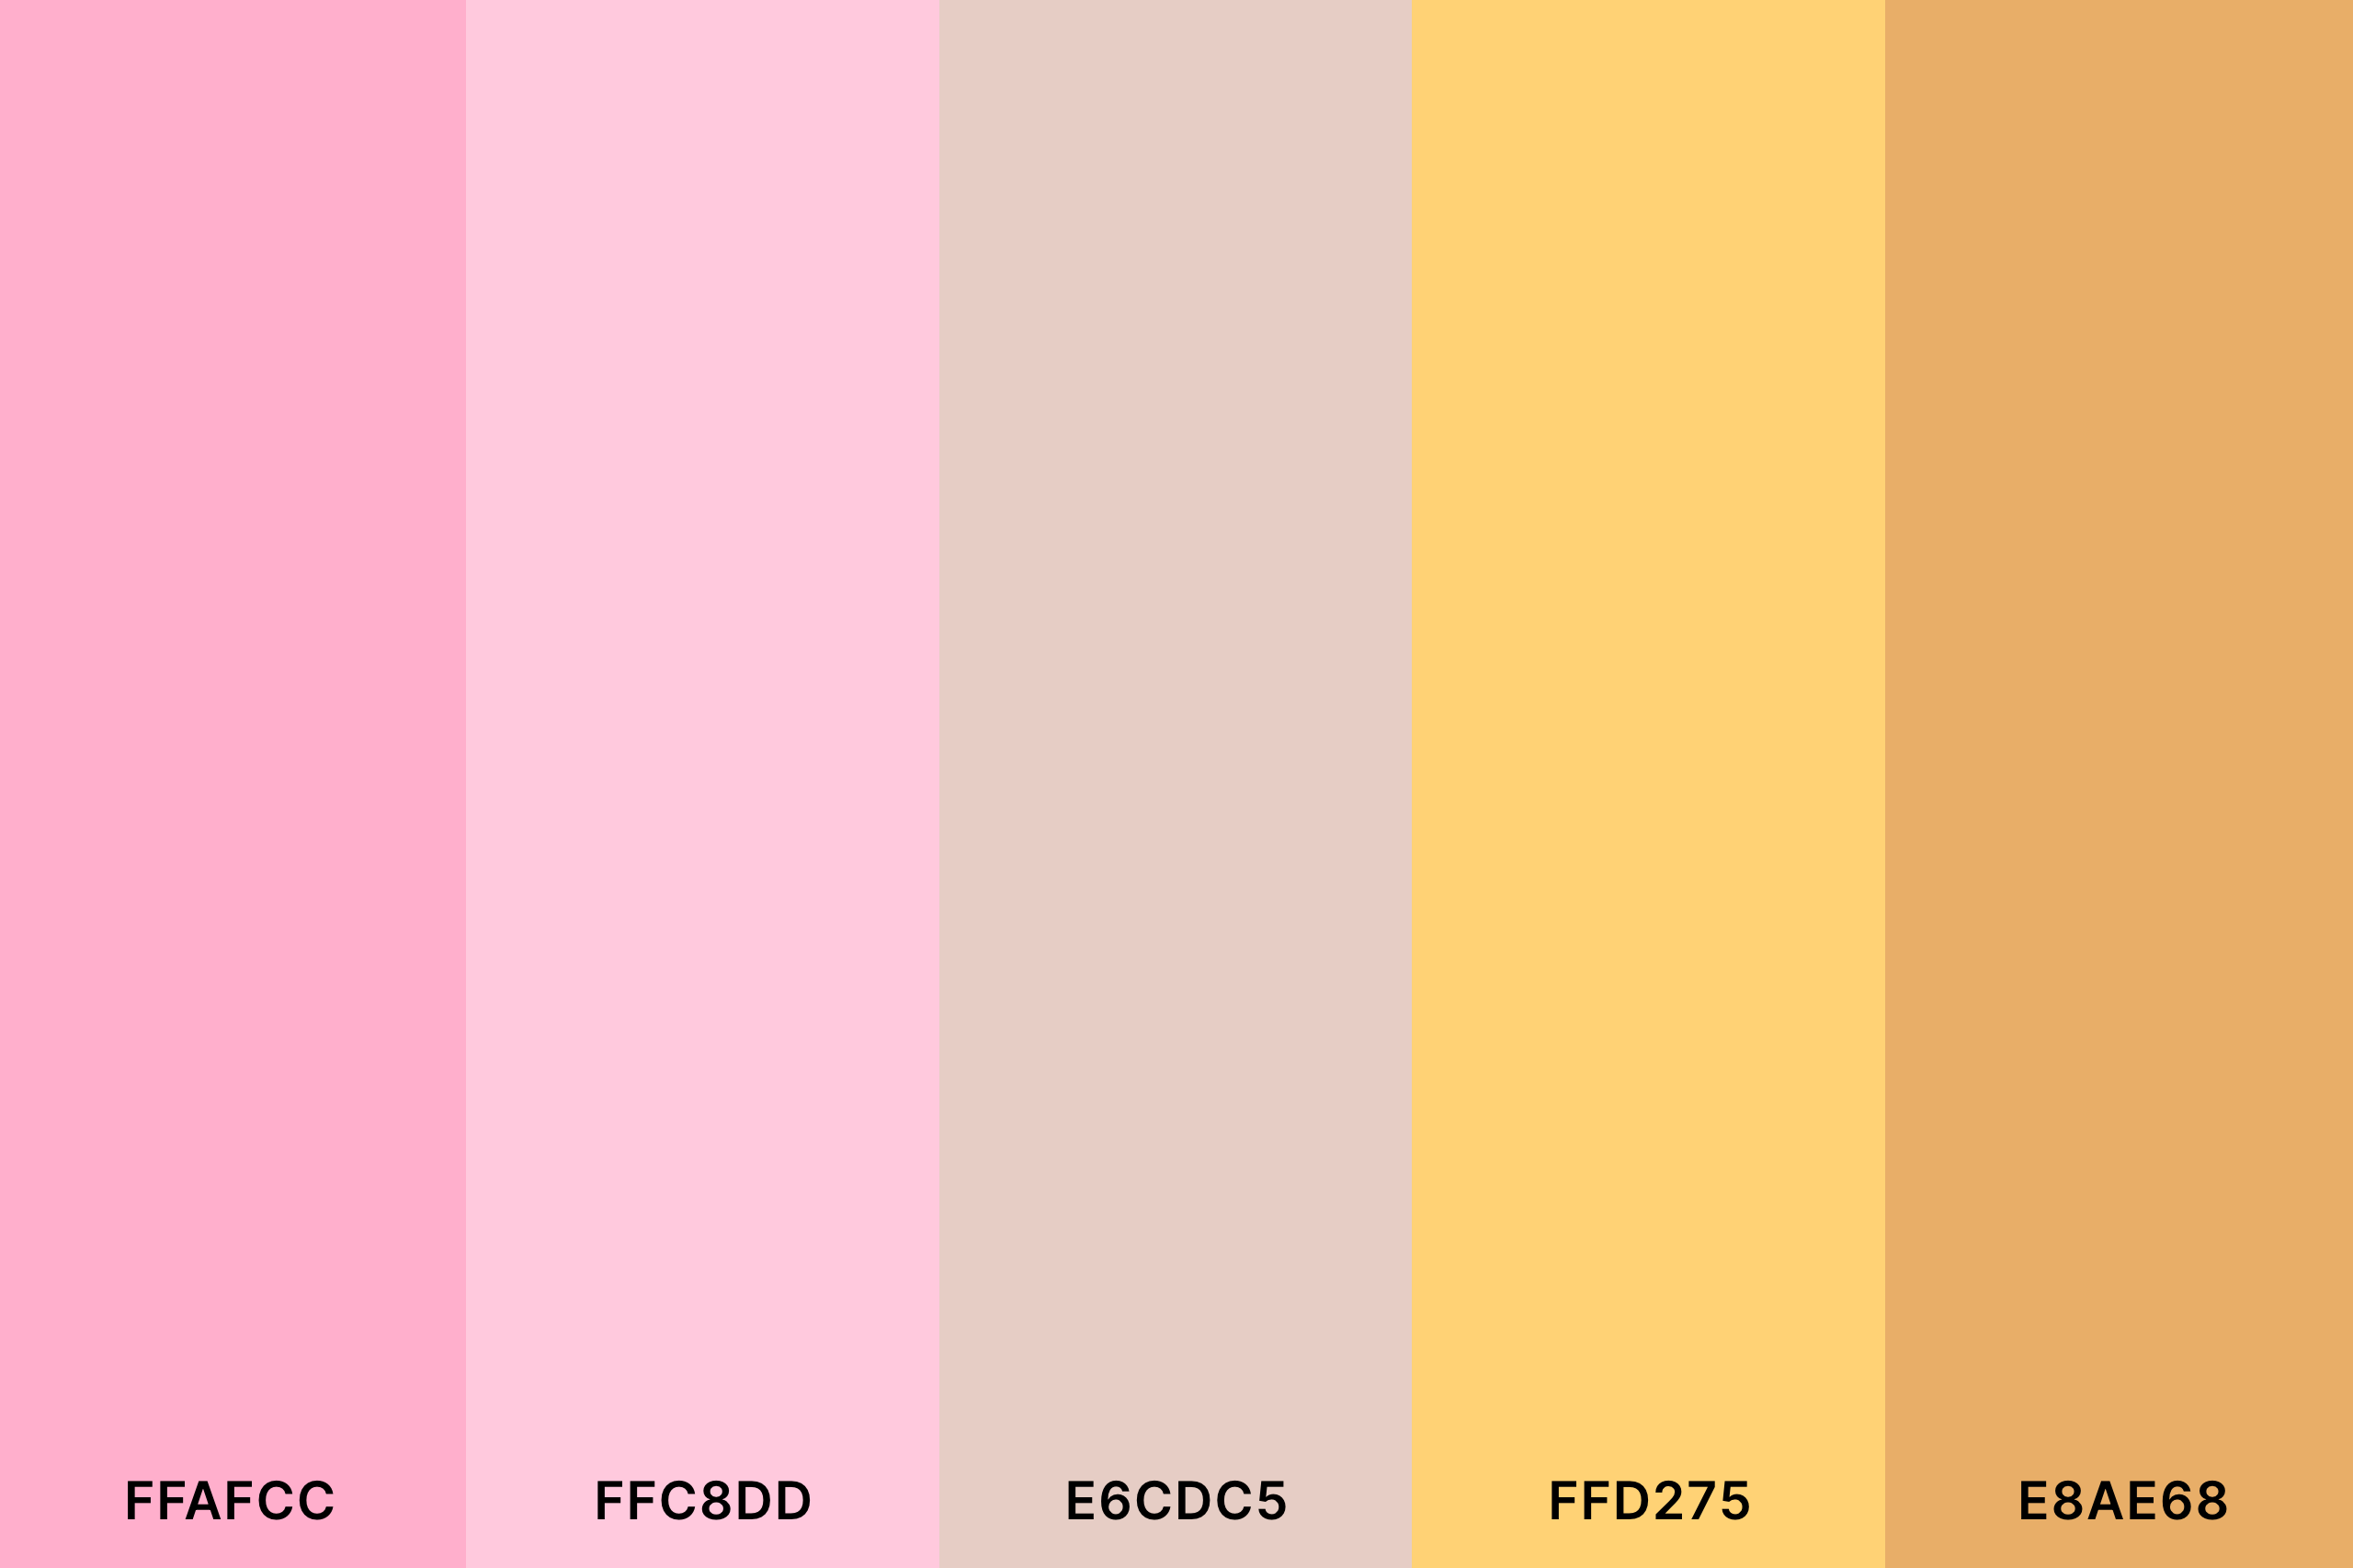 Peach Blush Color Palette with Carnation Pink (Hex #FFAFCC) + Fairy Tale (Hex #FFC8DD) + Peach Blush (Hex #E6CDC5) + Jasmine (Hex #FFD275) + Earth Yellow (Hex #E8AE68) Color Palette with Hex Codes